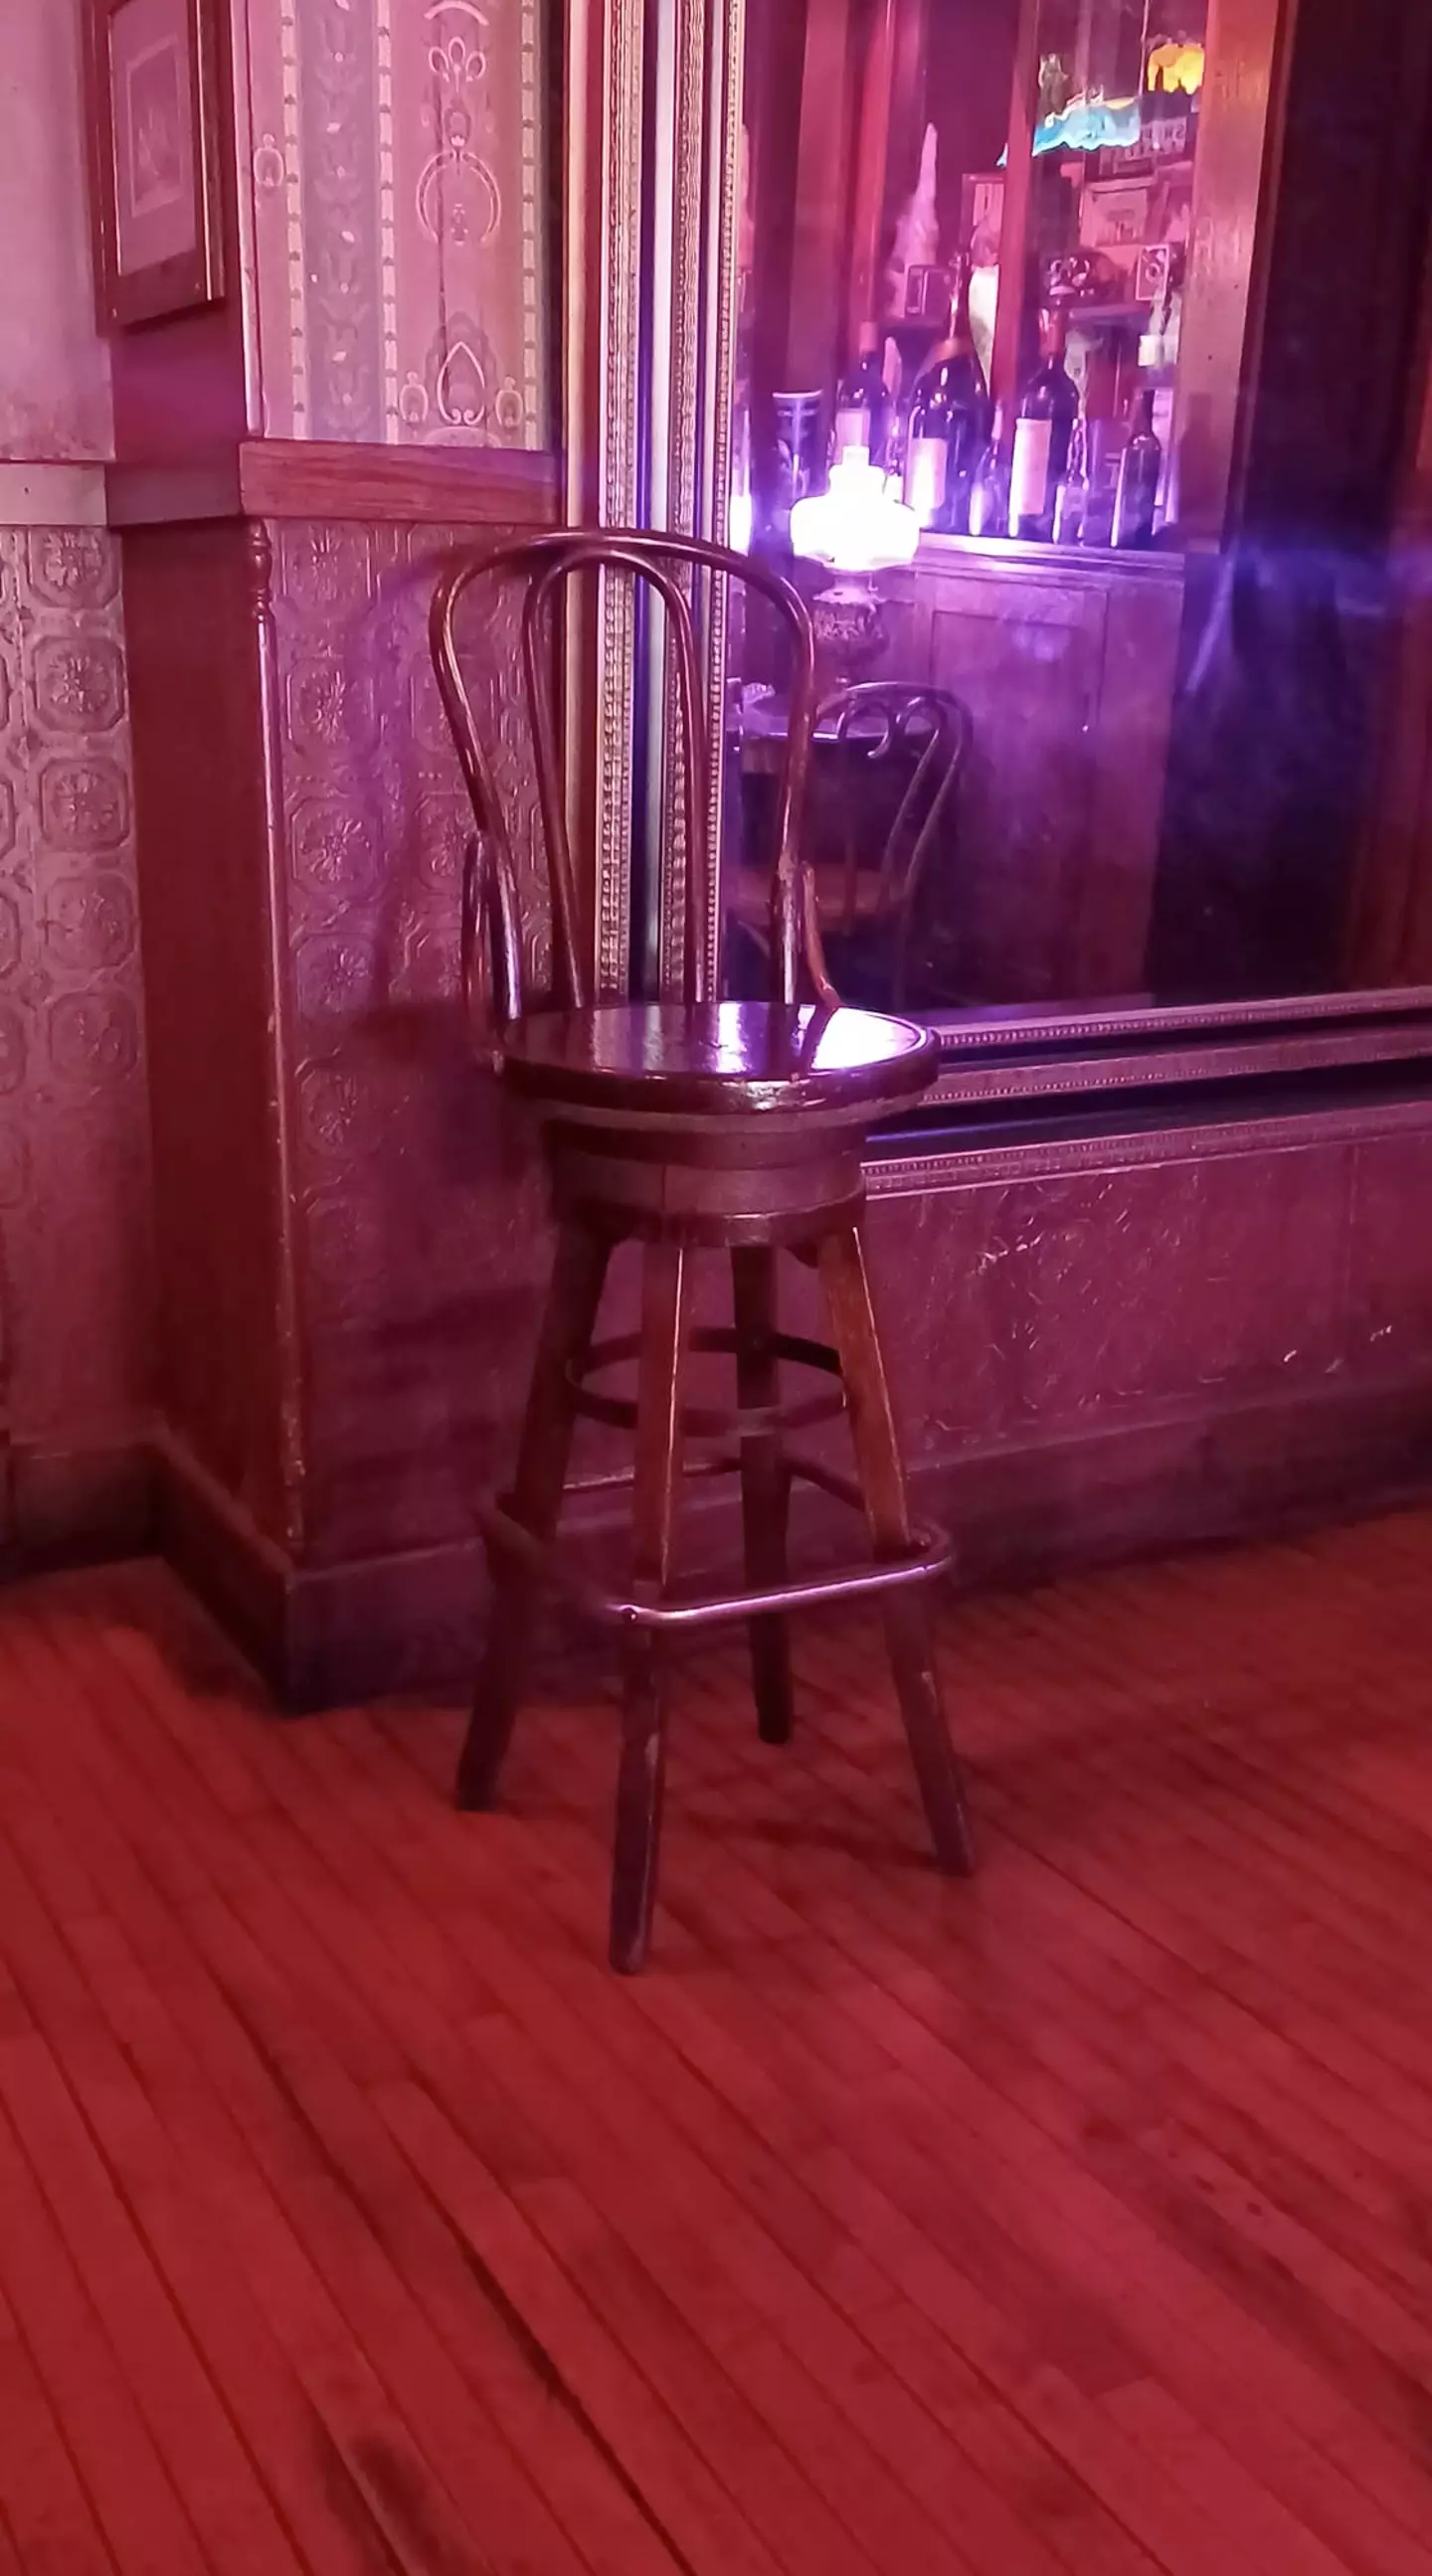 He would sit on this specific stool every time he went into the bar.